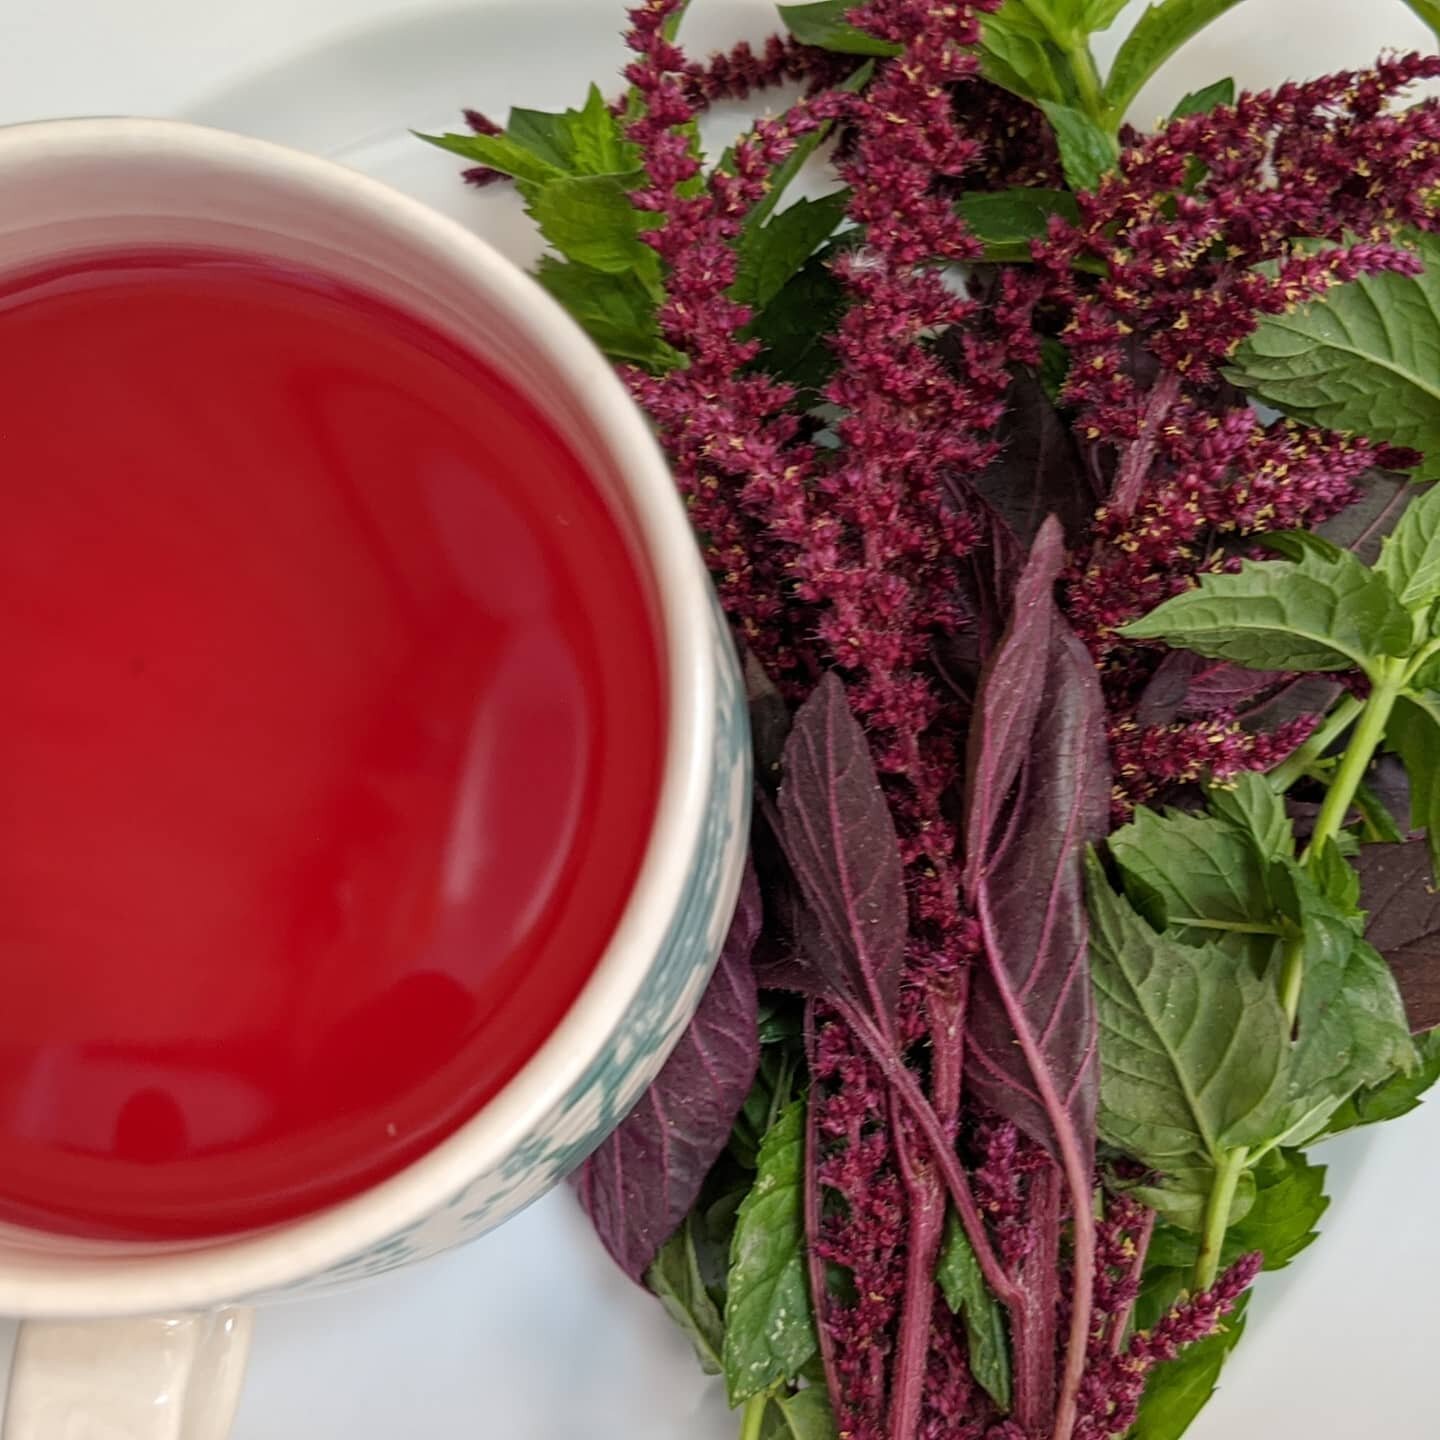 Amaranth and mint tea straight from the garden! Amaranth is a protein-packed pseudocereal crop that originated in the Americas. This tea, made with the flowers of the plant, is the beverage that Chef Ren&eacute; was raised on in his native Ecuador. 
